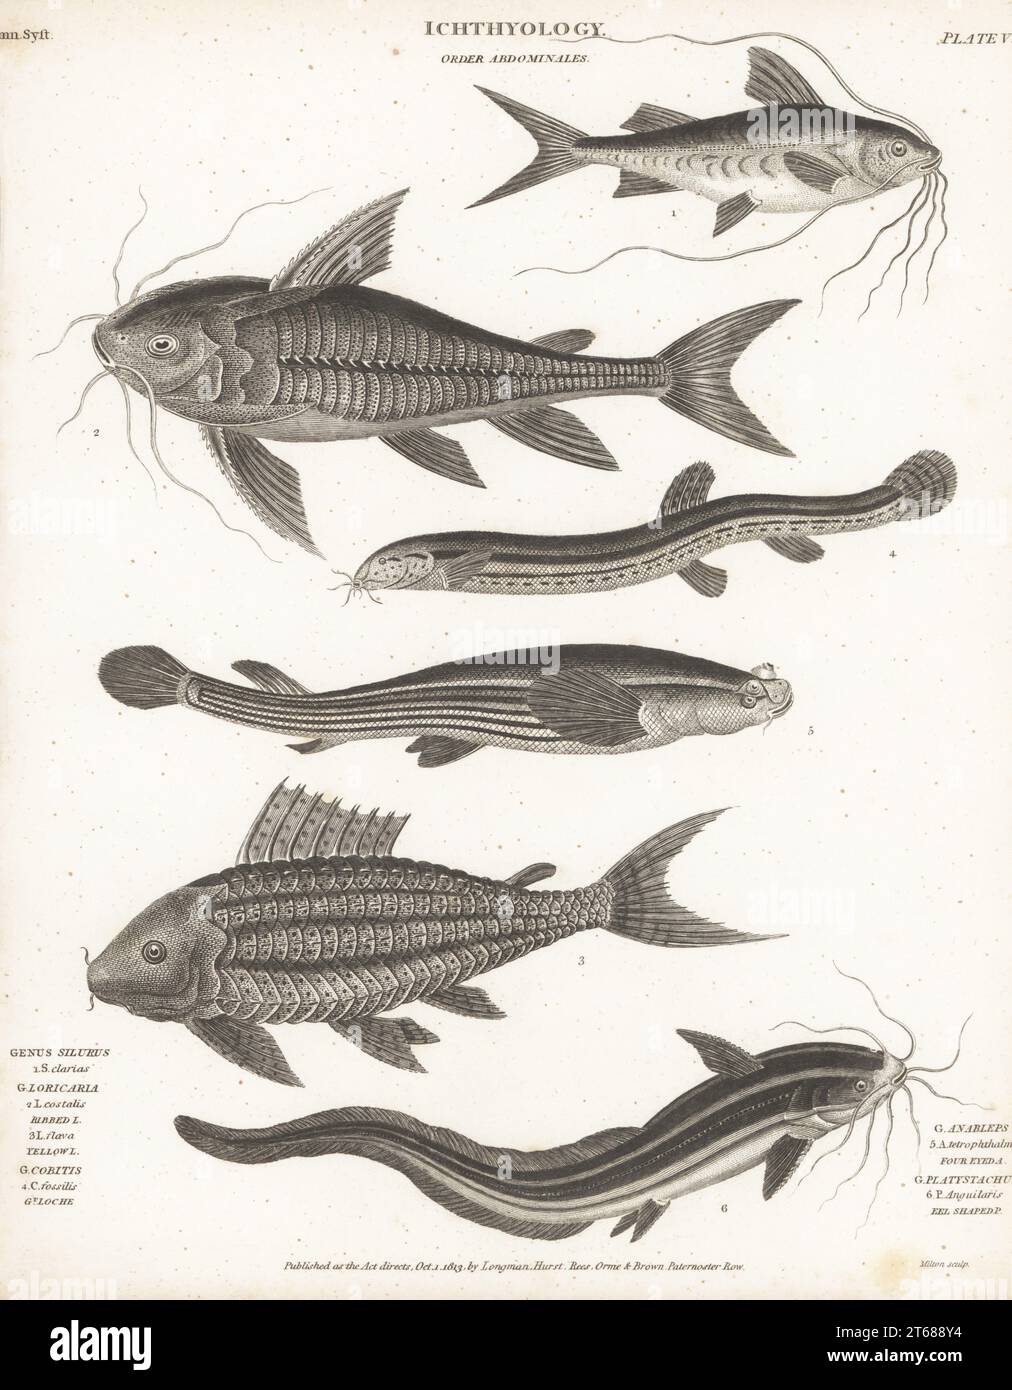 Bloch's catfish, Pimelodus blochii 1, Raphael catfish, Platydoras costatus 2, suckermouth catfish, Hypostomus plecostomus 3, weatherfish, Misgurnus fossilis 4, largescale four-eyes, Anableps anableps 5, and striped eel catfish, Plotosus lineatus 6. Copperplate engraving by Thomas Milton from Abraham Rees' Cyclopedia or Universal Dictionary of Arts, Sciences and Literature, Longman, Hurst, Rees, Orme and Brown, Paternoster Row, London, October 1, 1813. Stock Photo